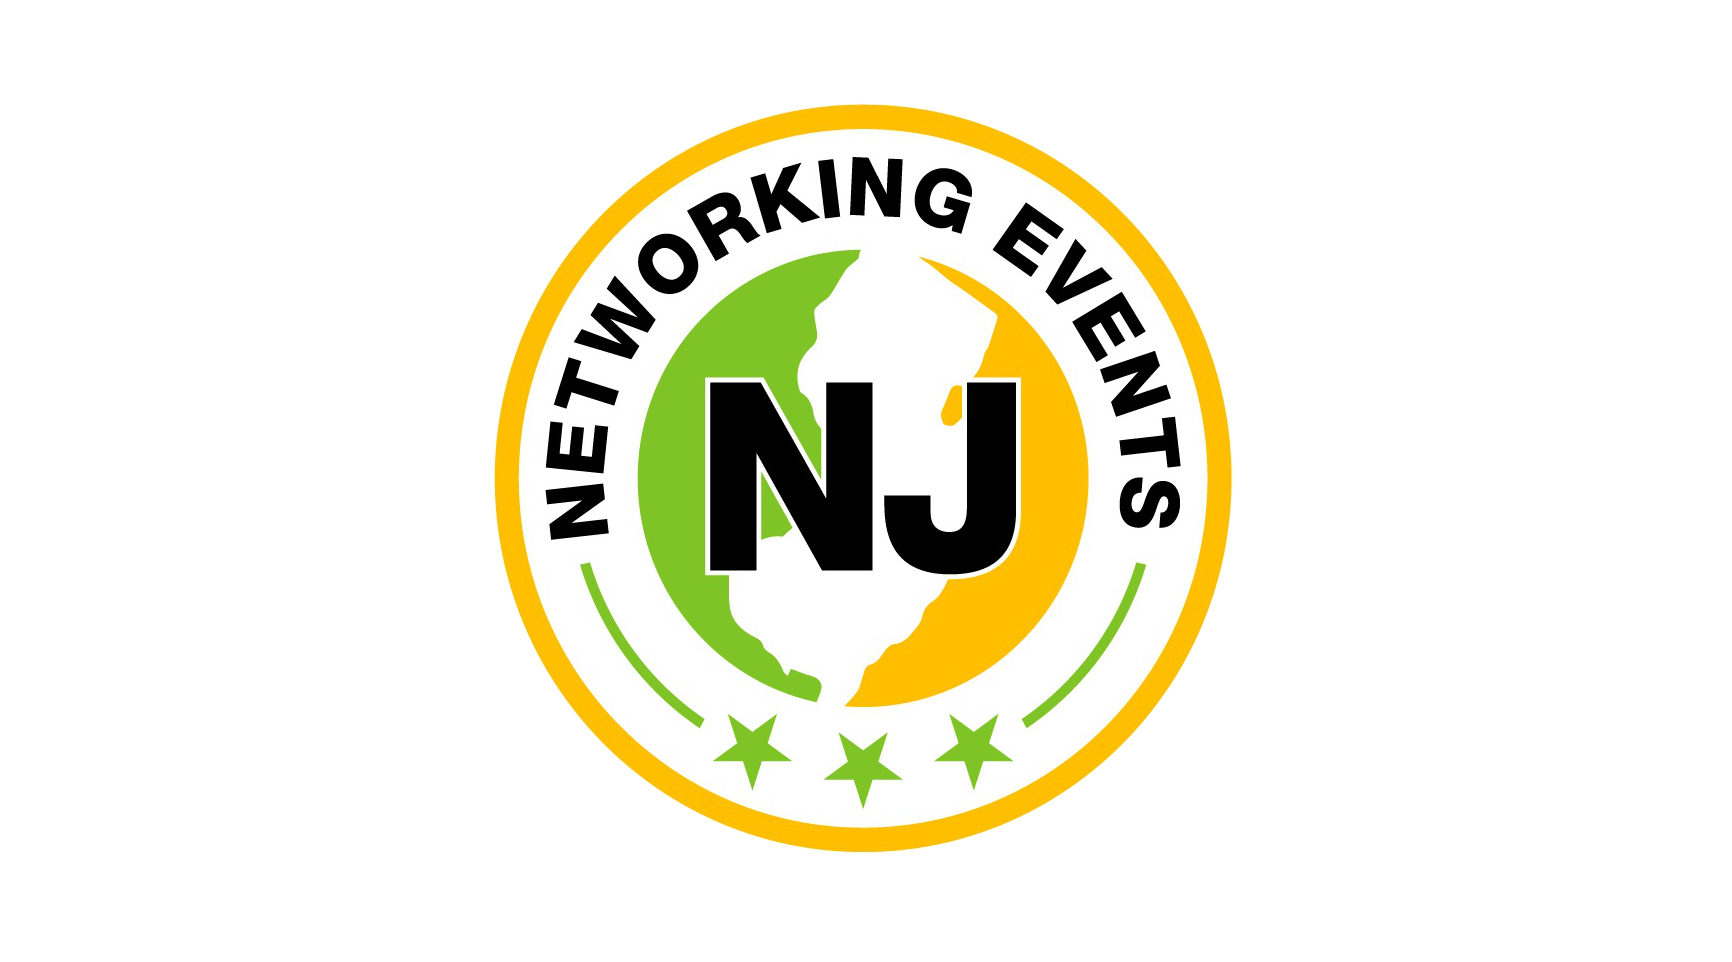 NJ Networking Events